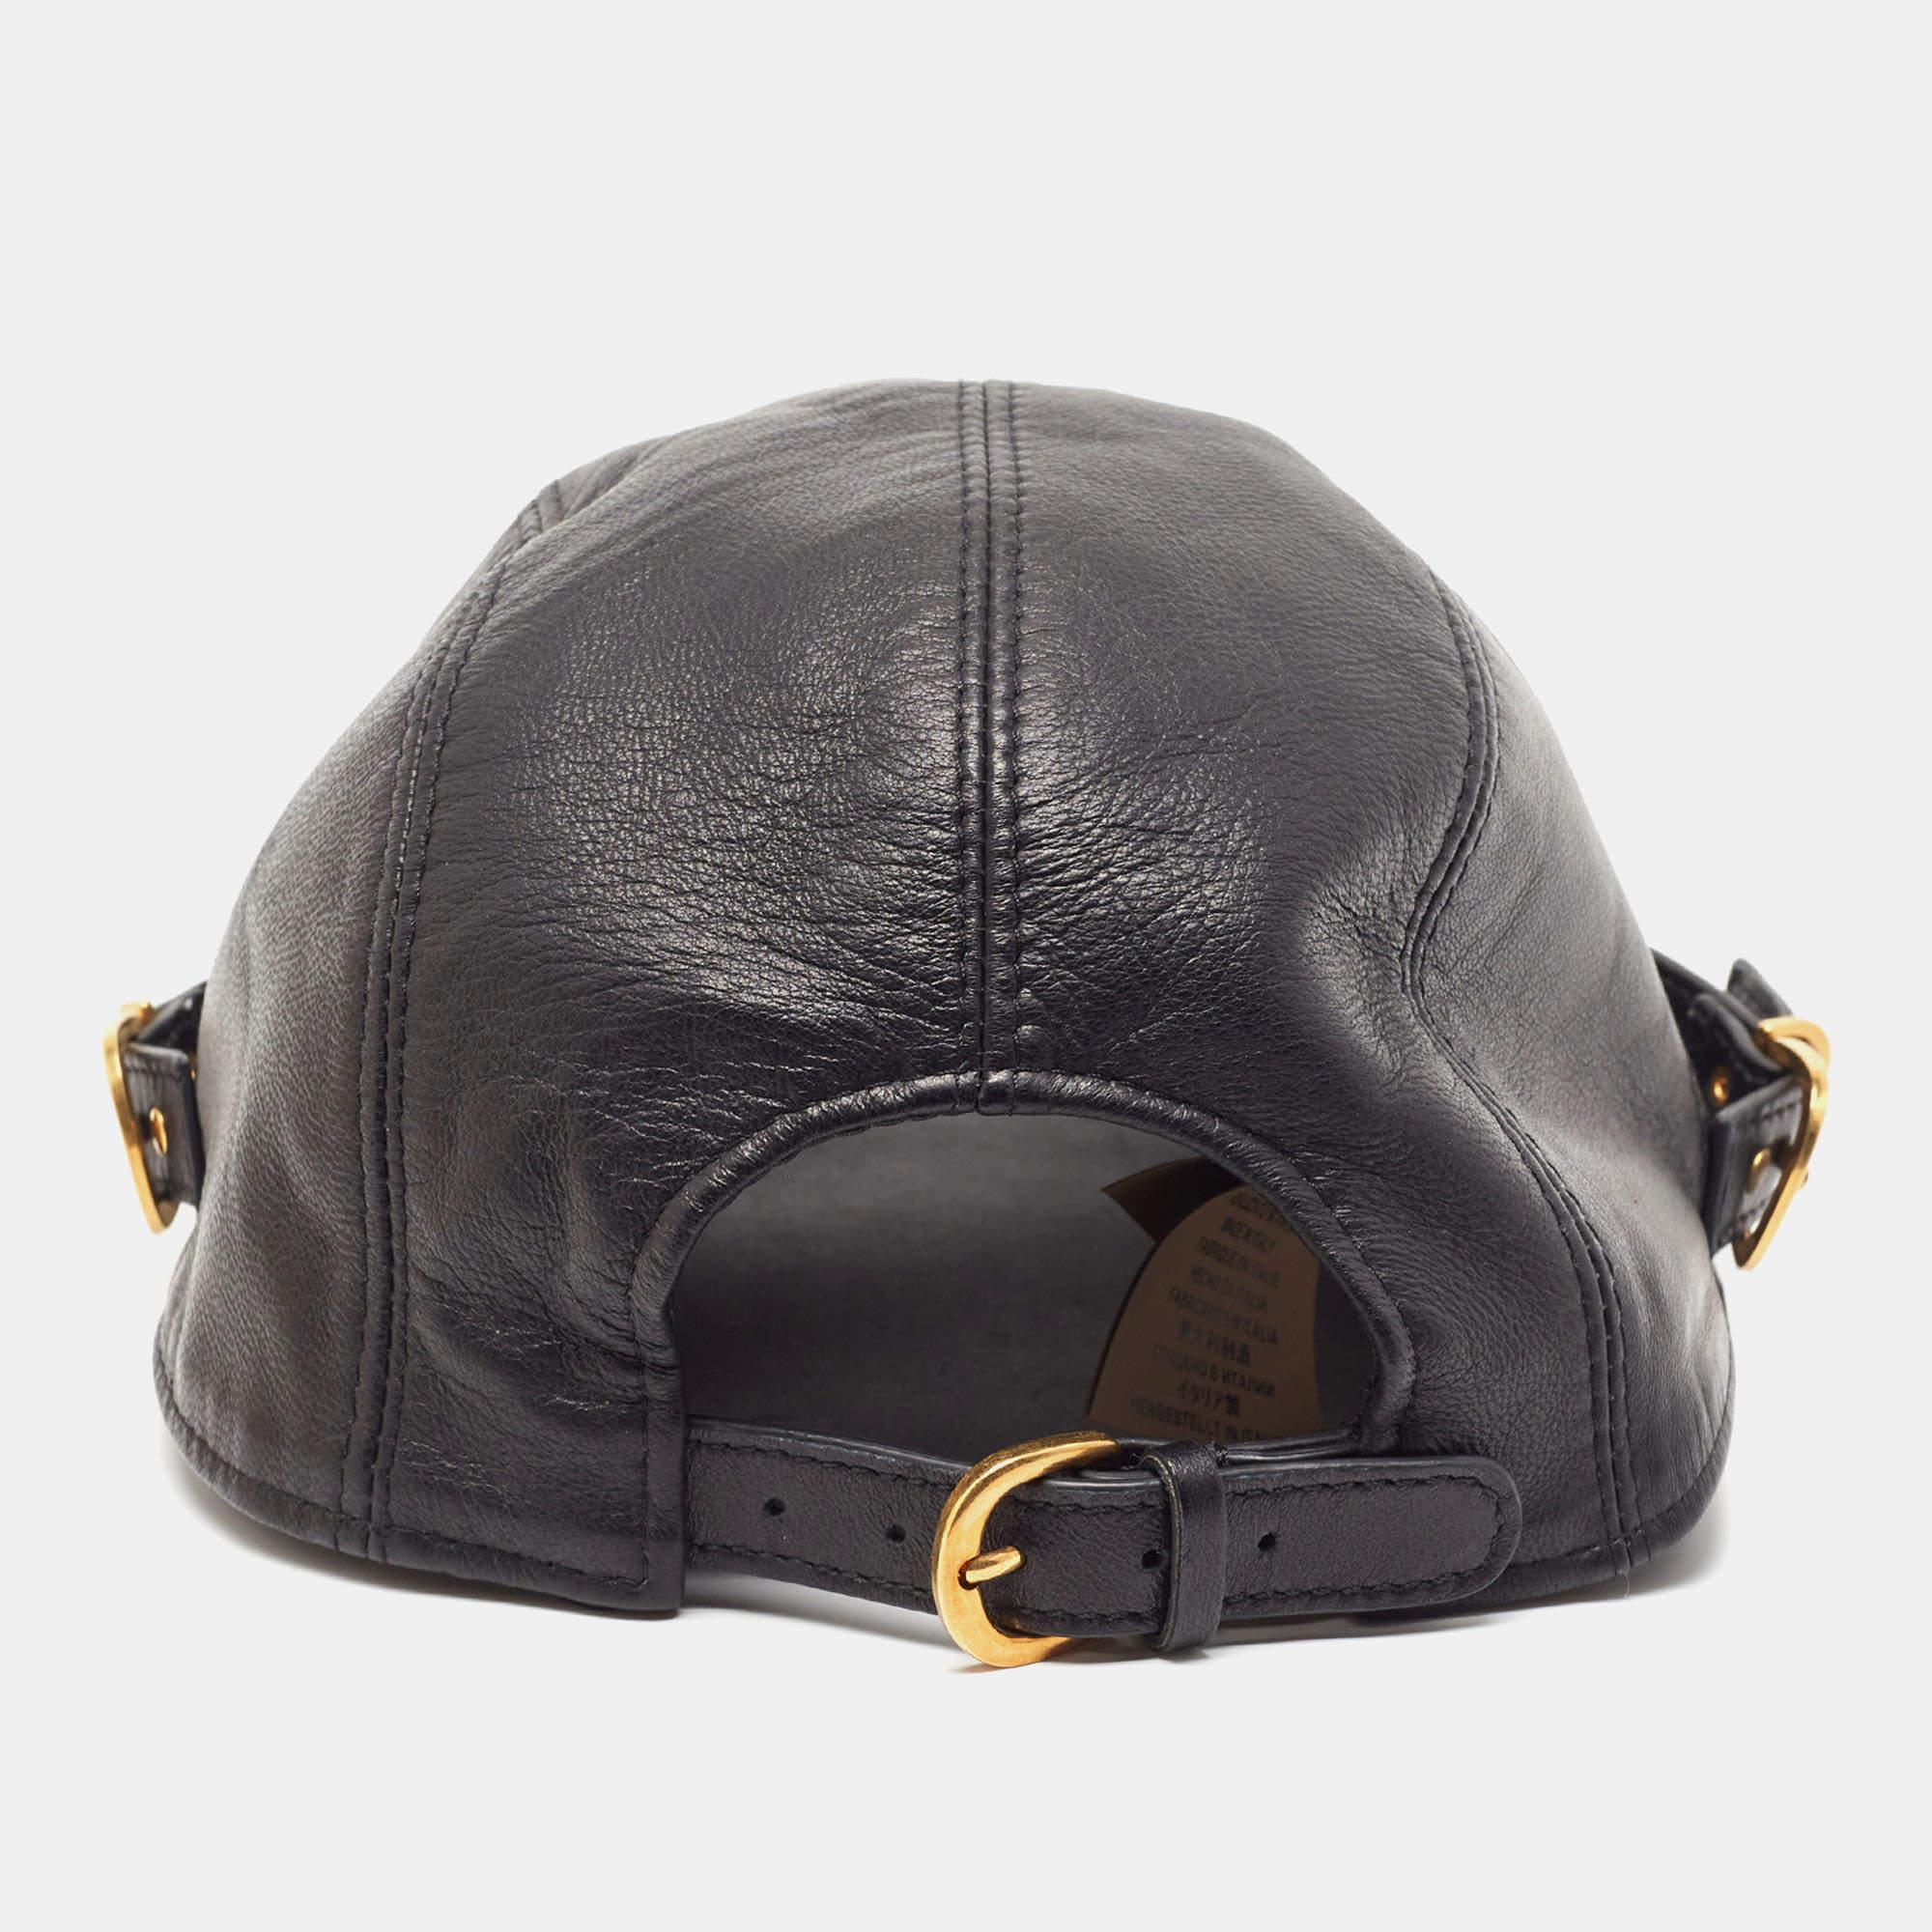 Caps are an ideal style statement with casual outfits. This Versace piece is made from quality materials and features signature elements. This piece will be a smart addition to your cap collection.

